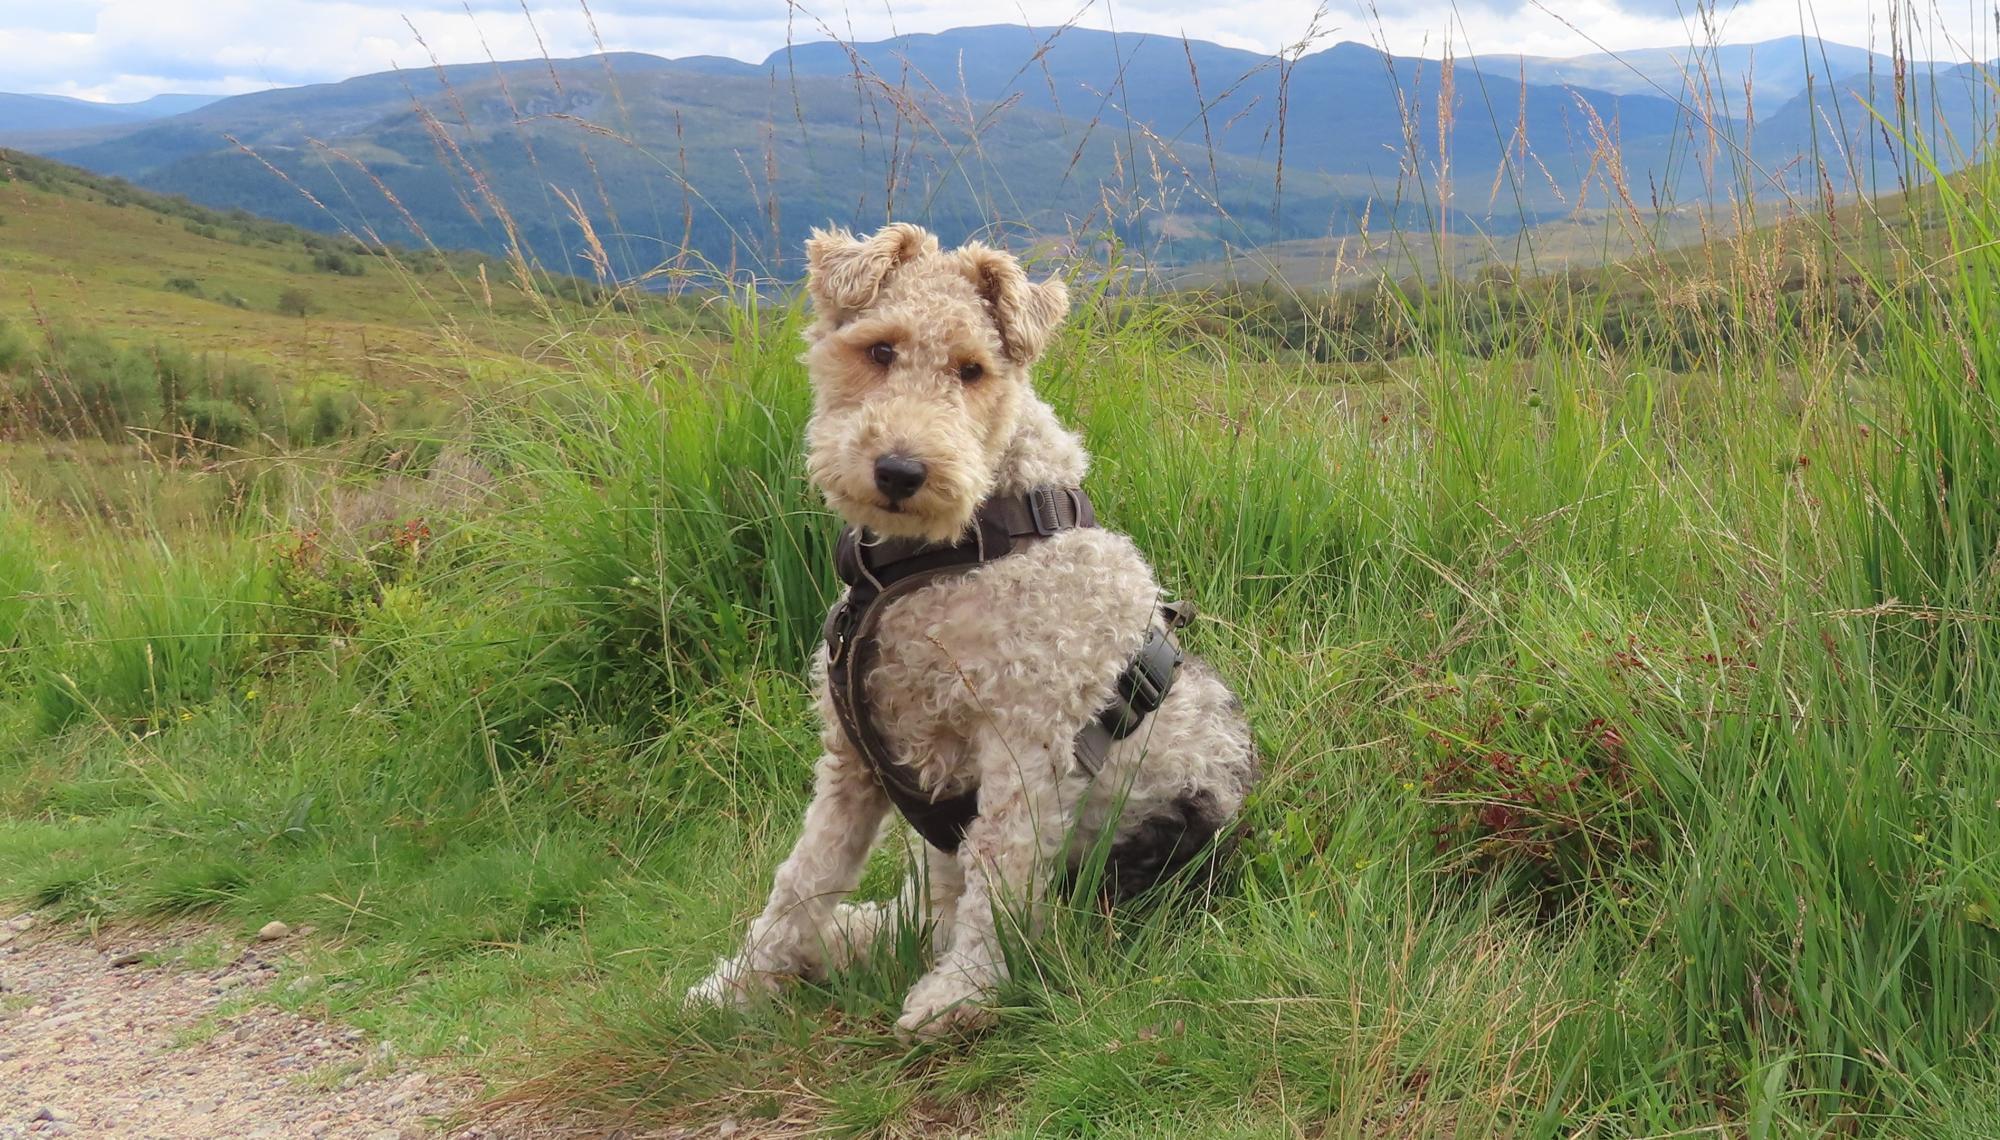 Terrier sitting on grassy patch with hills in the background. 